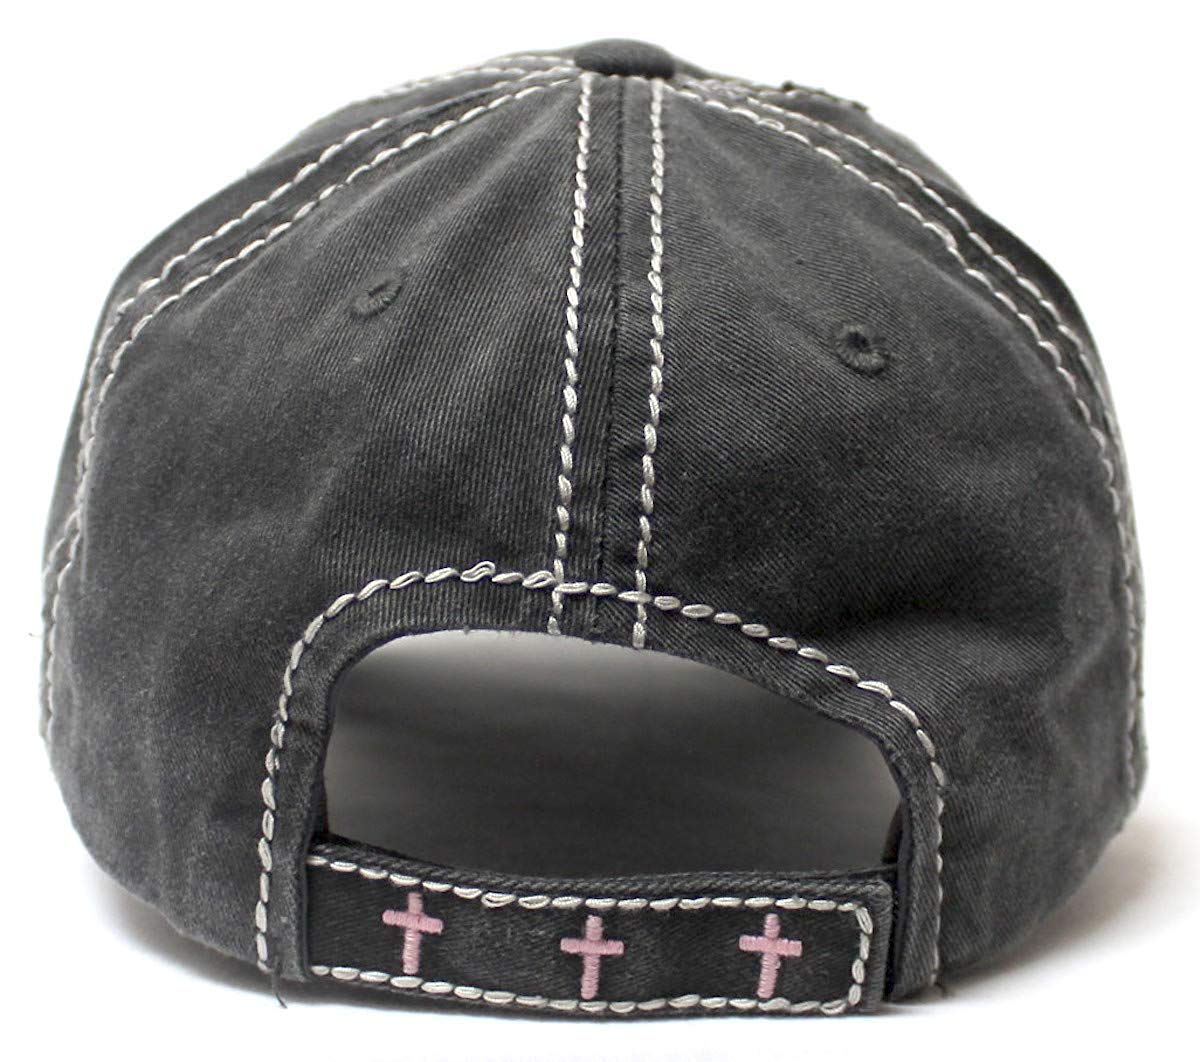 Women's Baseball Cap Jesus Loves This Hot Mess Heart Patch Embroidery Hat, Vintage Black - Caps 'N Vintage 